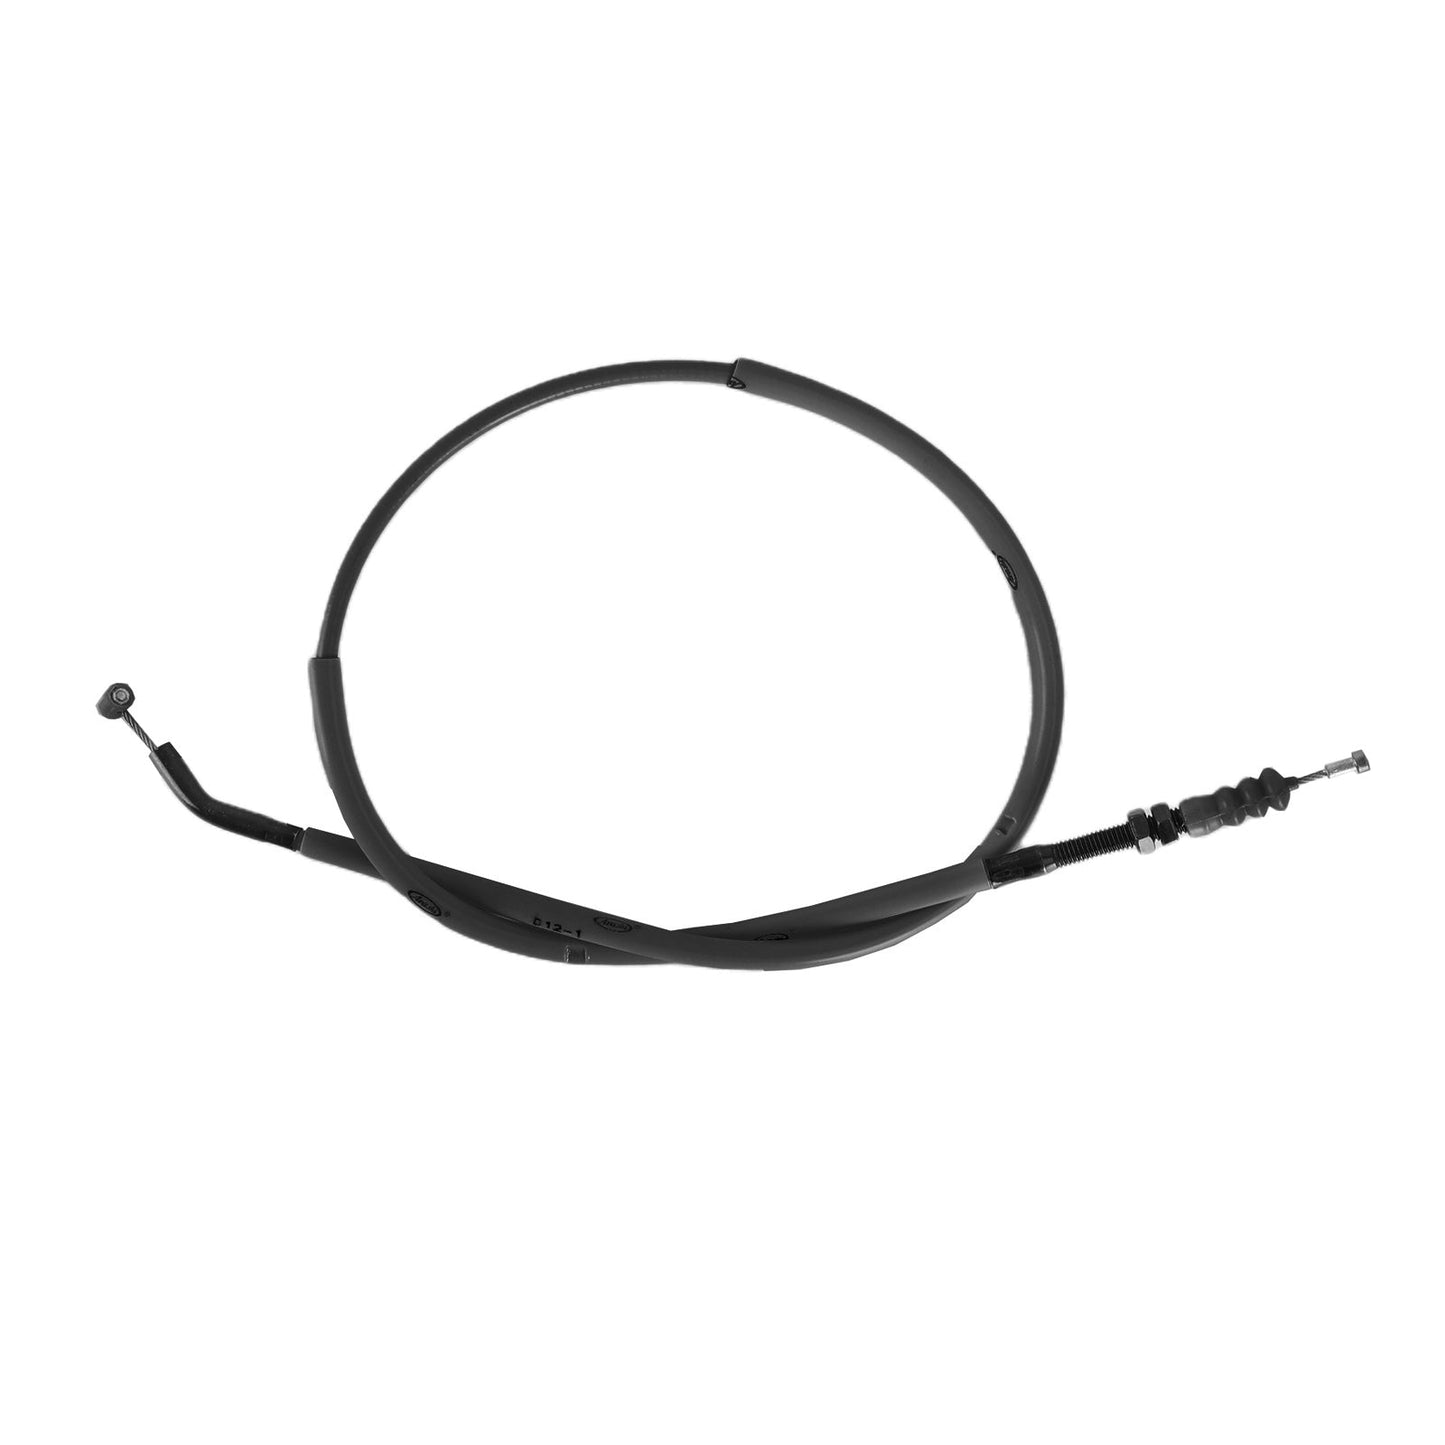 Motorcycle Clutch Cable Replacement fit for Kawasaki Z650 2017-2020